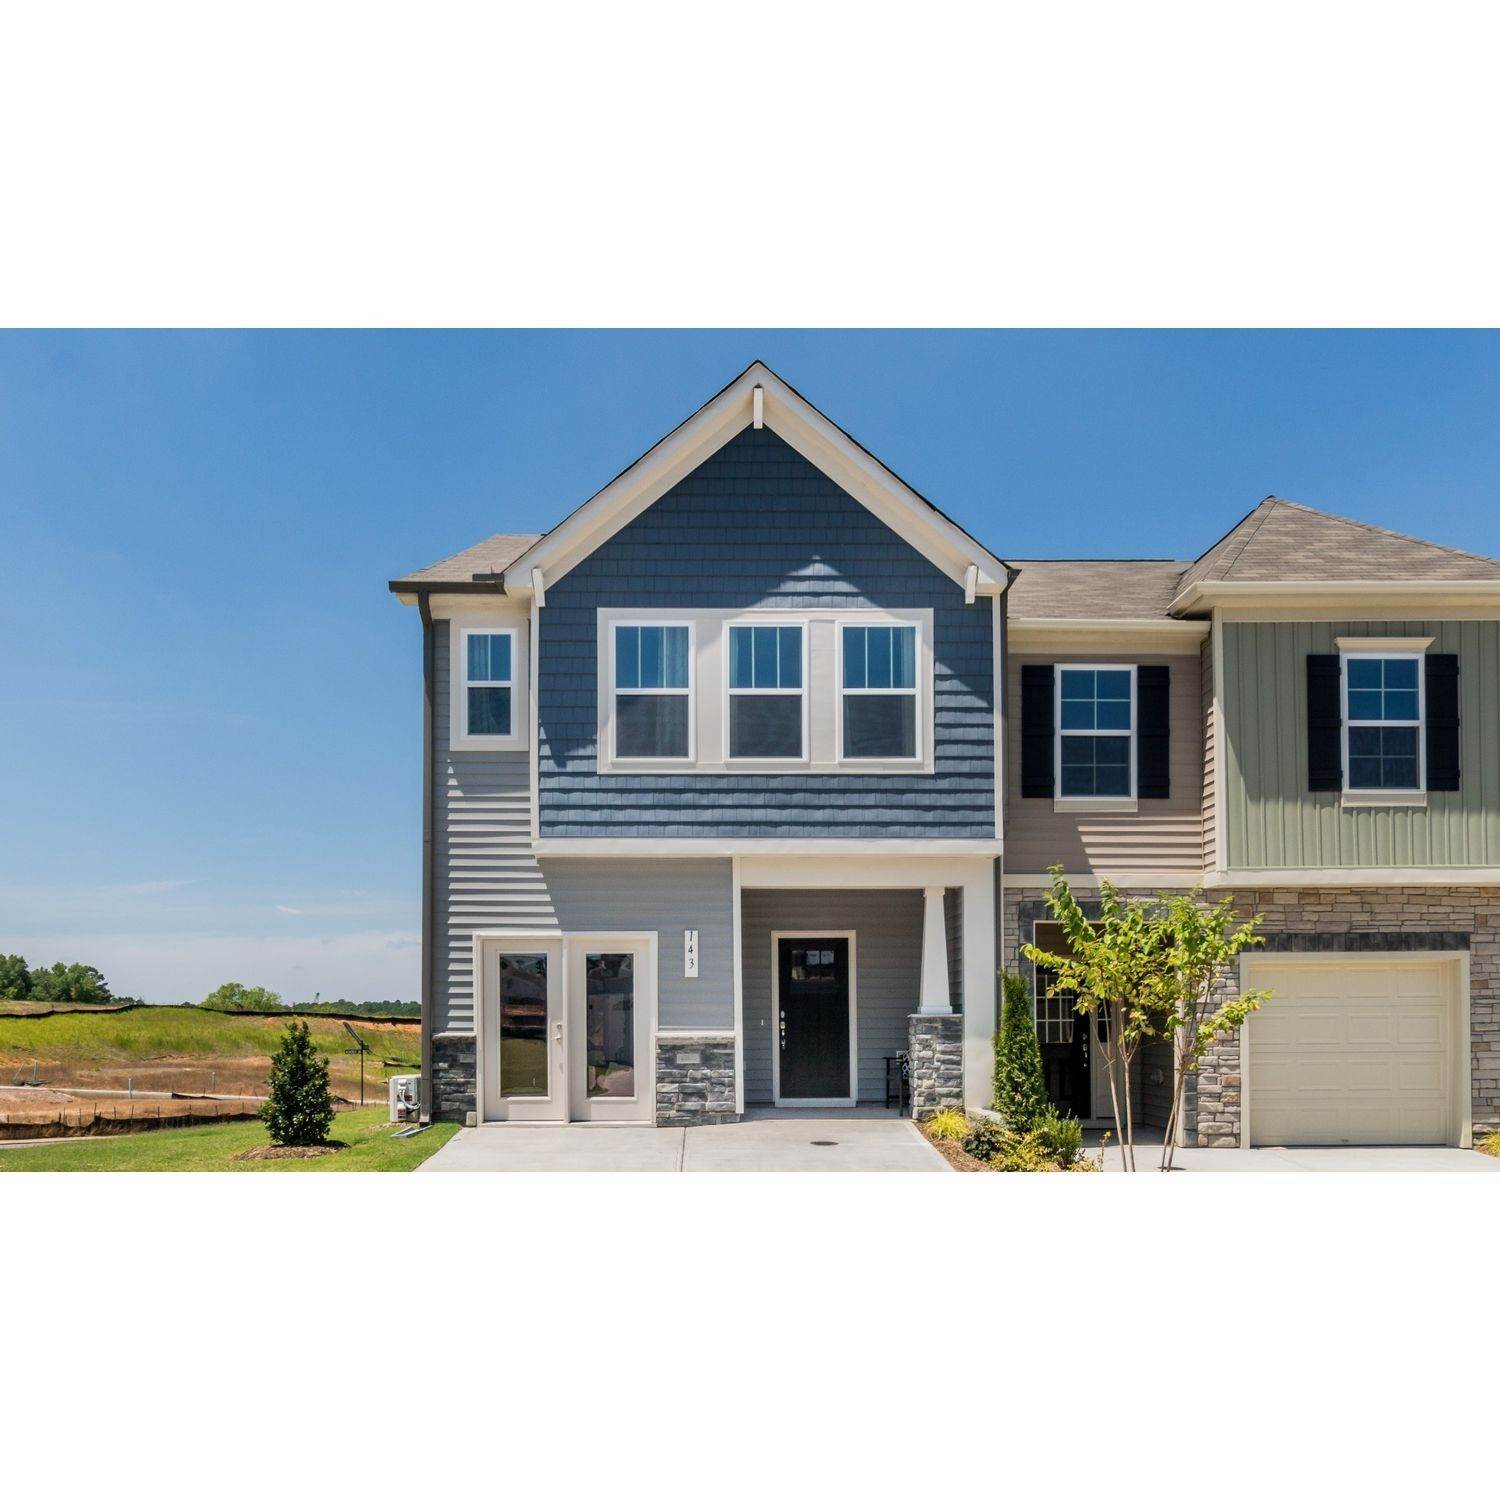 Spring Village Townhomes建於 1133 Chalybeate Springs Road, Angier, NC 27501